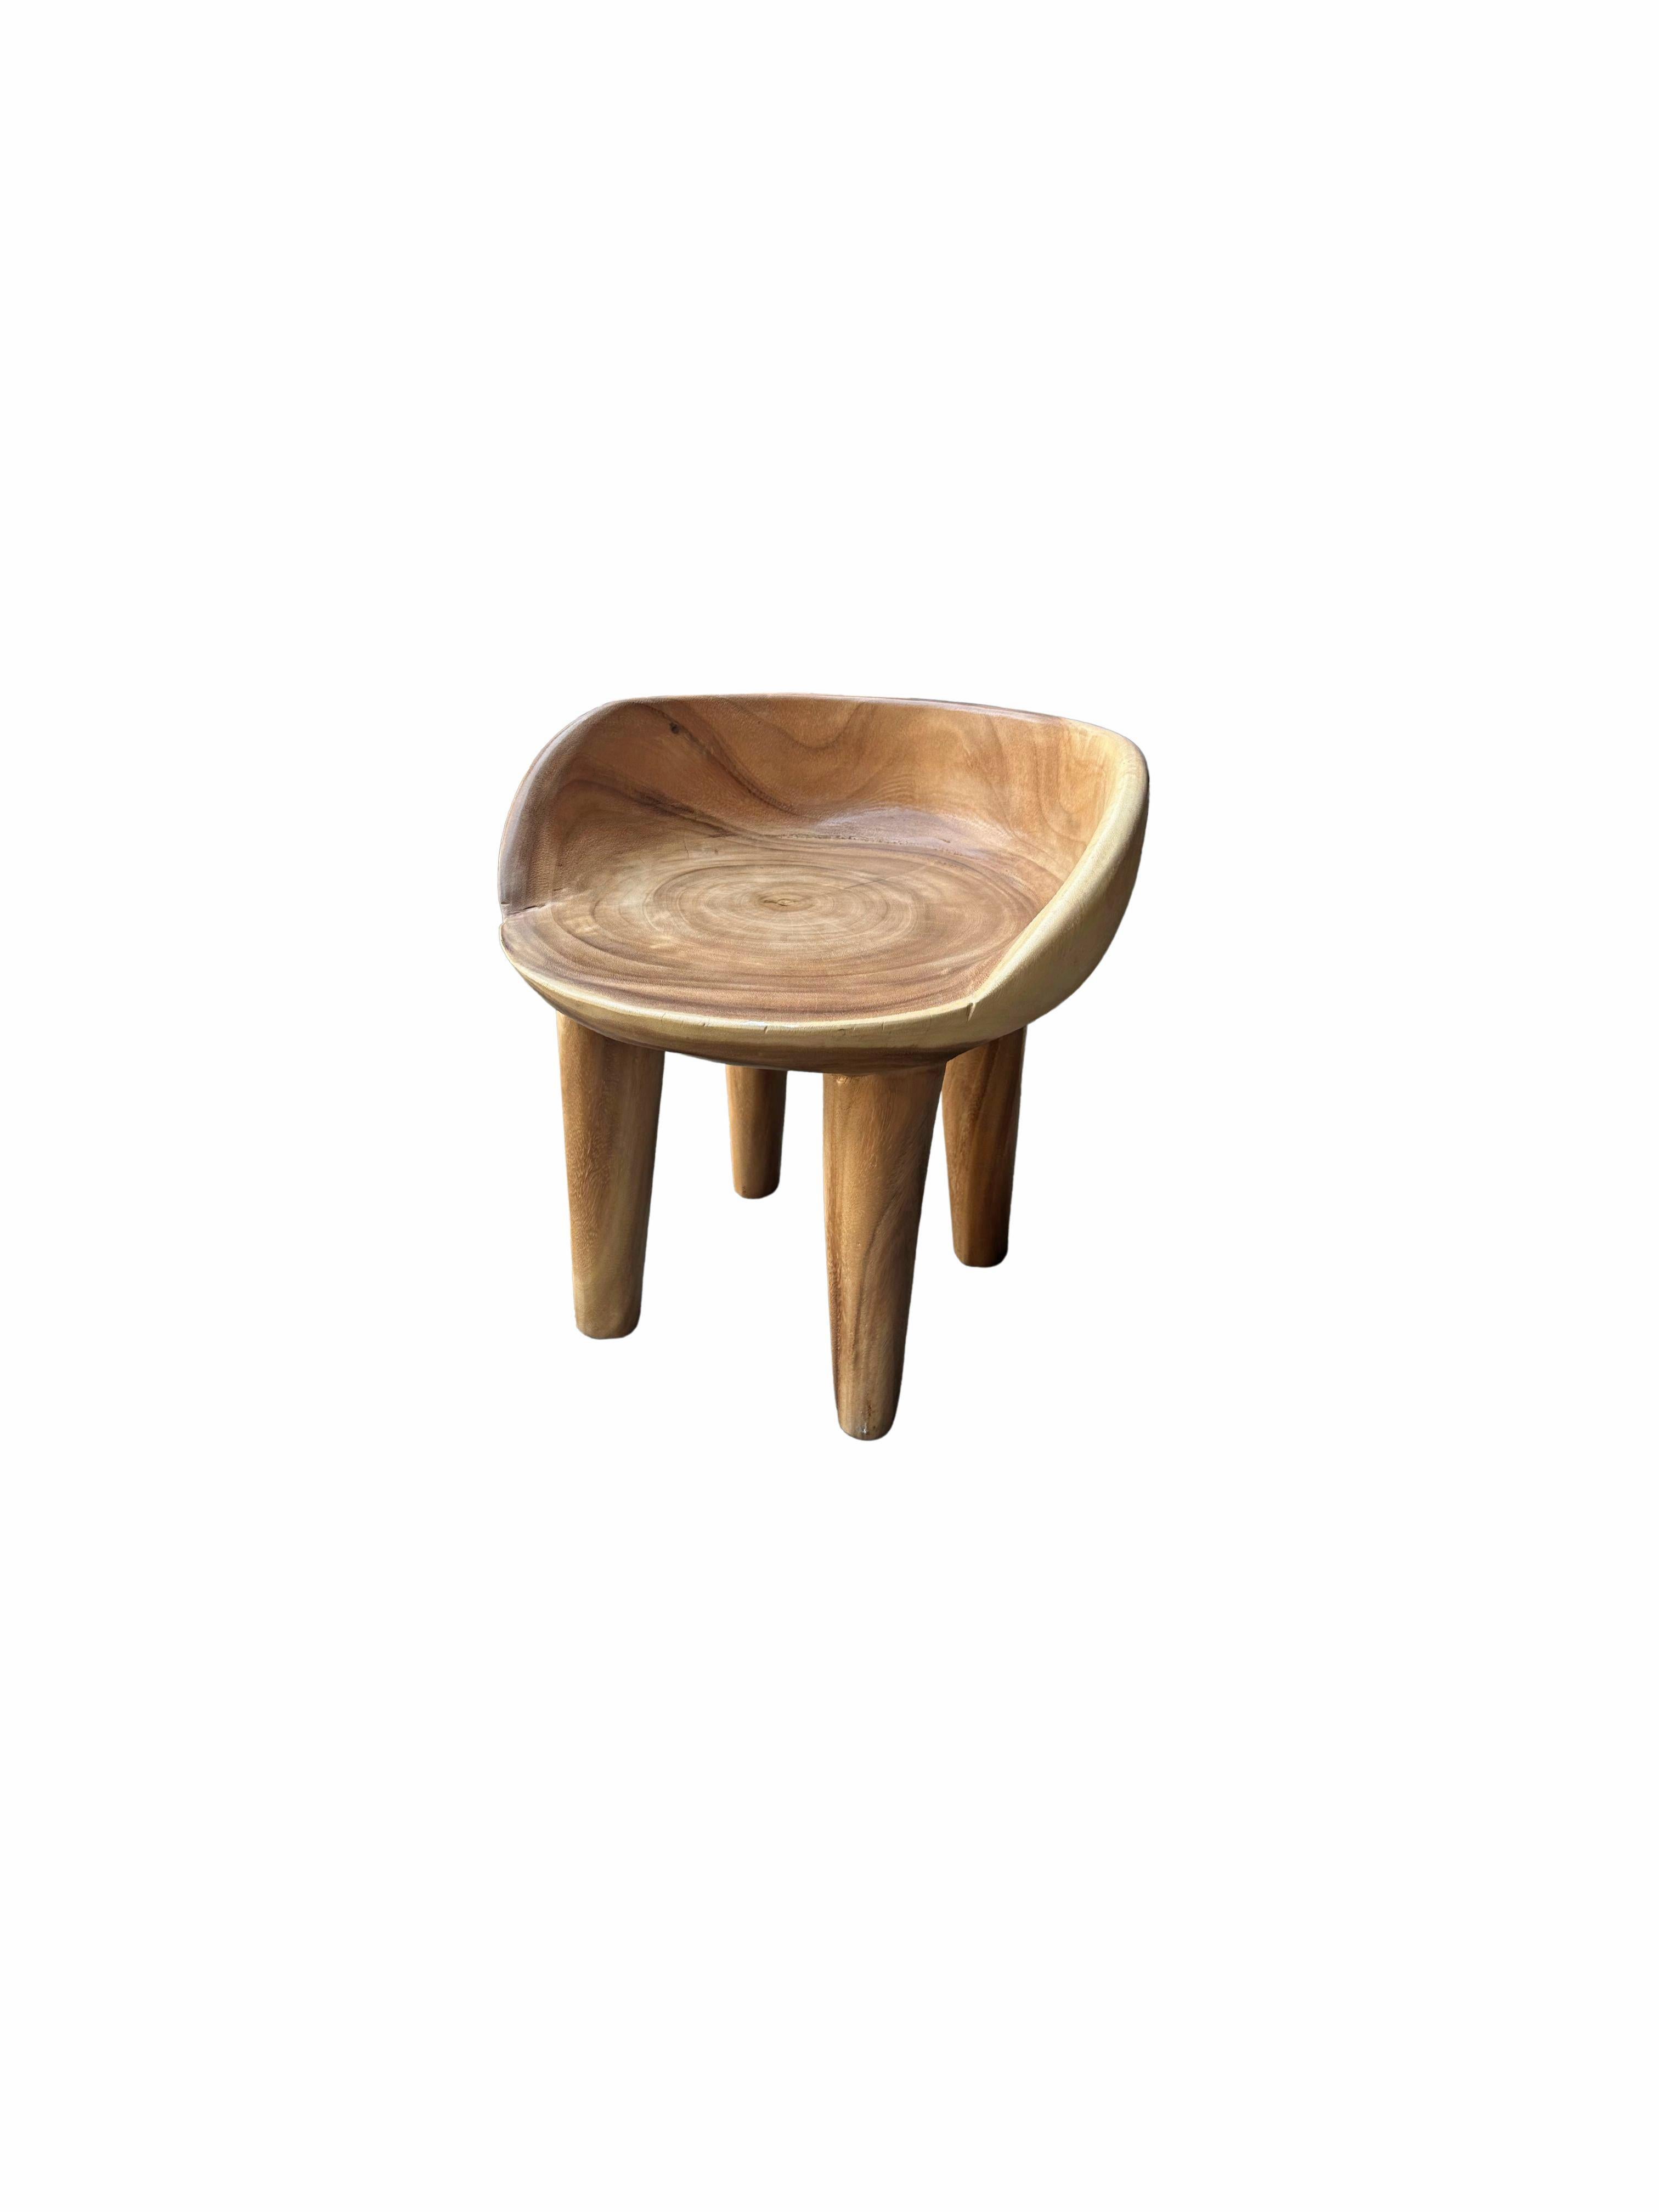 This wonderfully sculptural chair was crafted from a single block of suar wood. The chair sits on 4 slender legs. Its neutral pigment makes it perfect for any space. This chair features a natural finish with a clear coat. It was sanded down